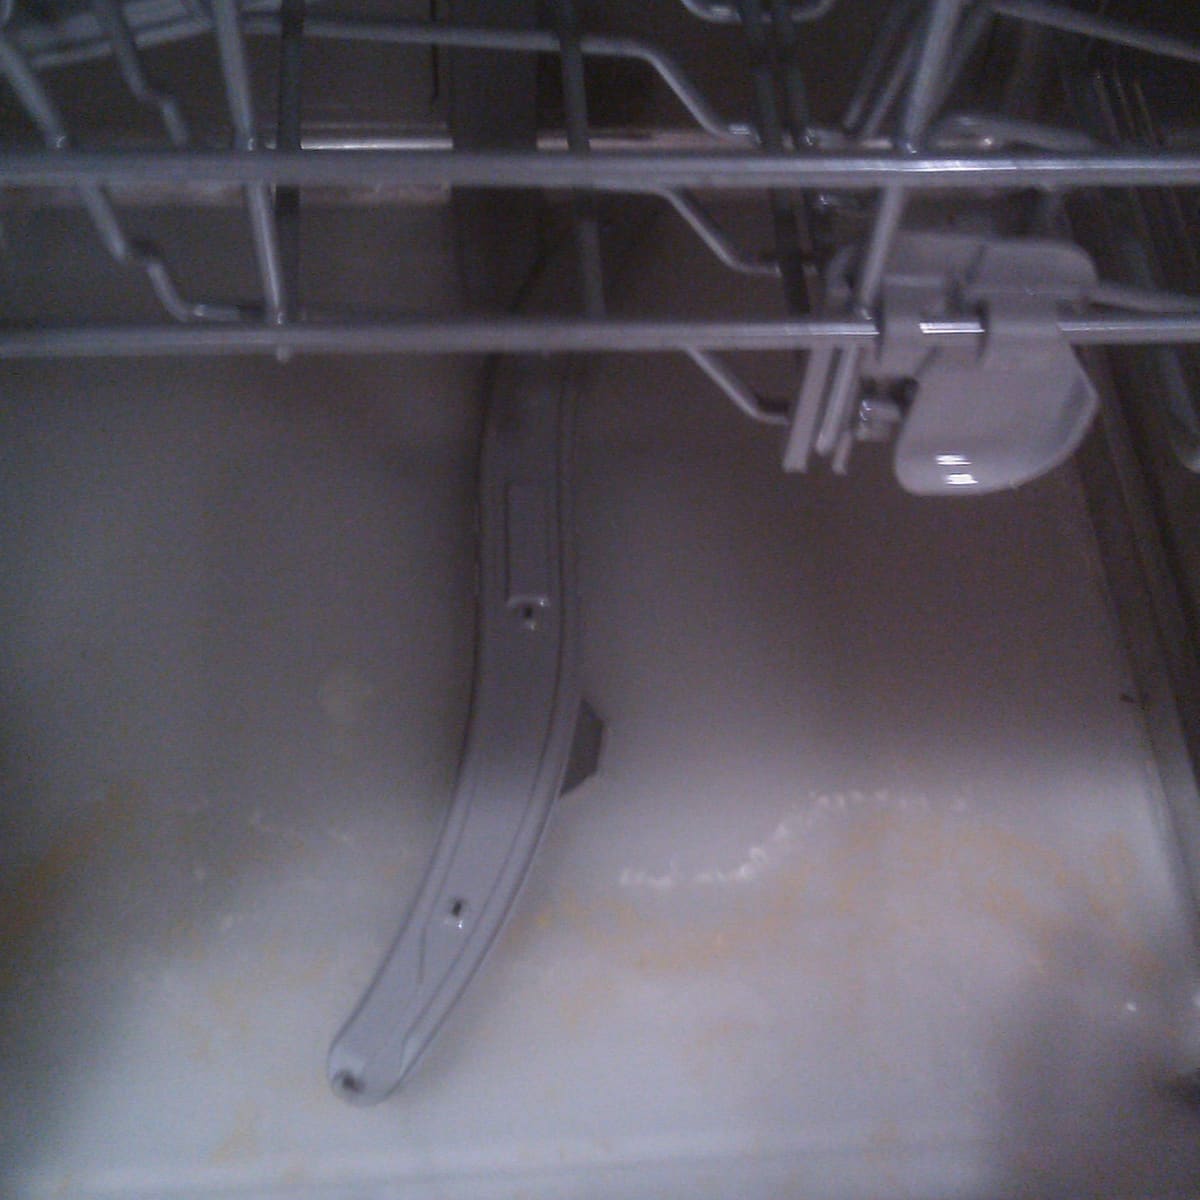 how to replace a dishwasher where there was none